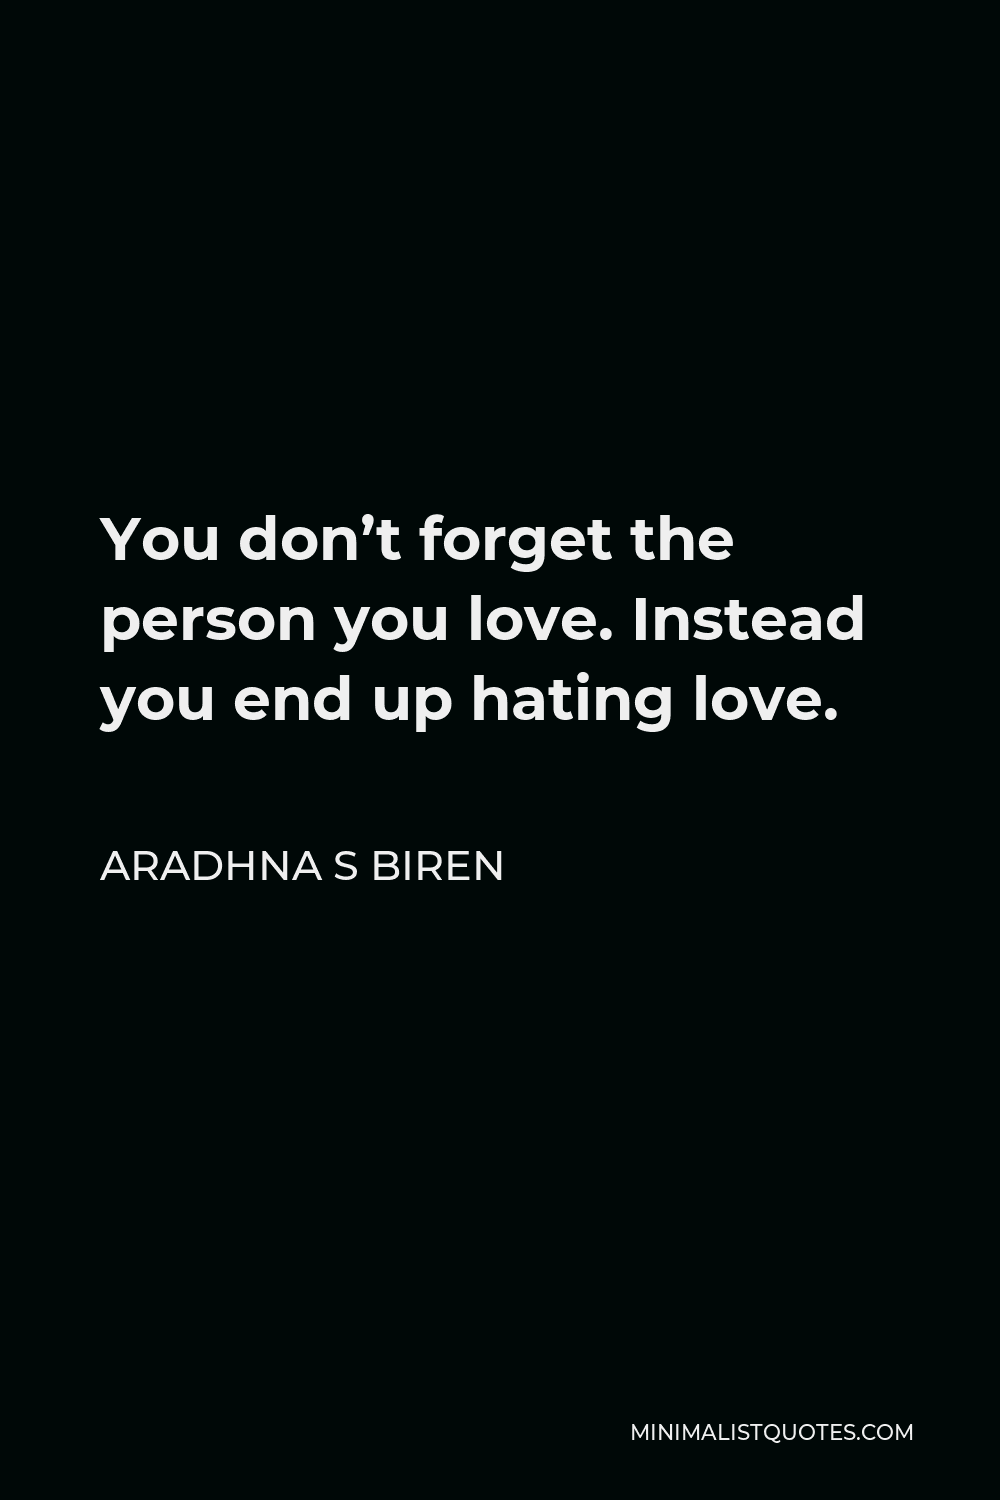 Aradhna S Biren Quote - You don’t forget the person you love. Instead you end up hating love.